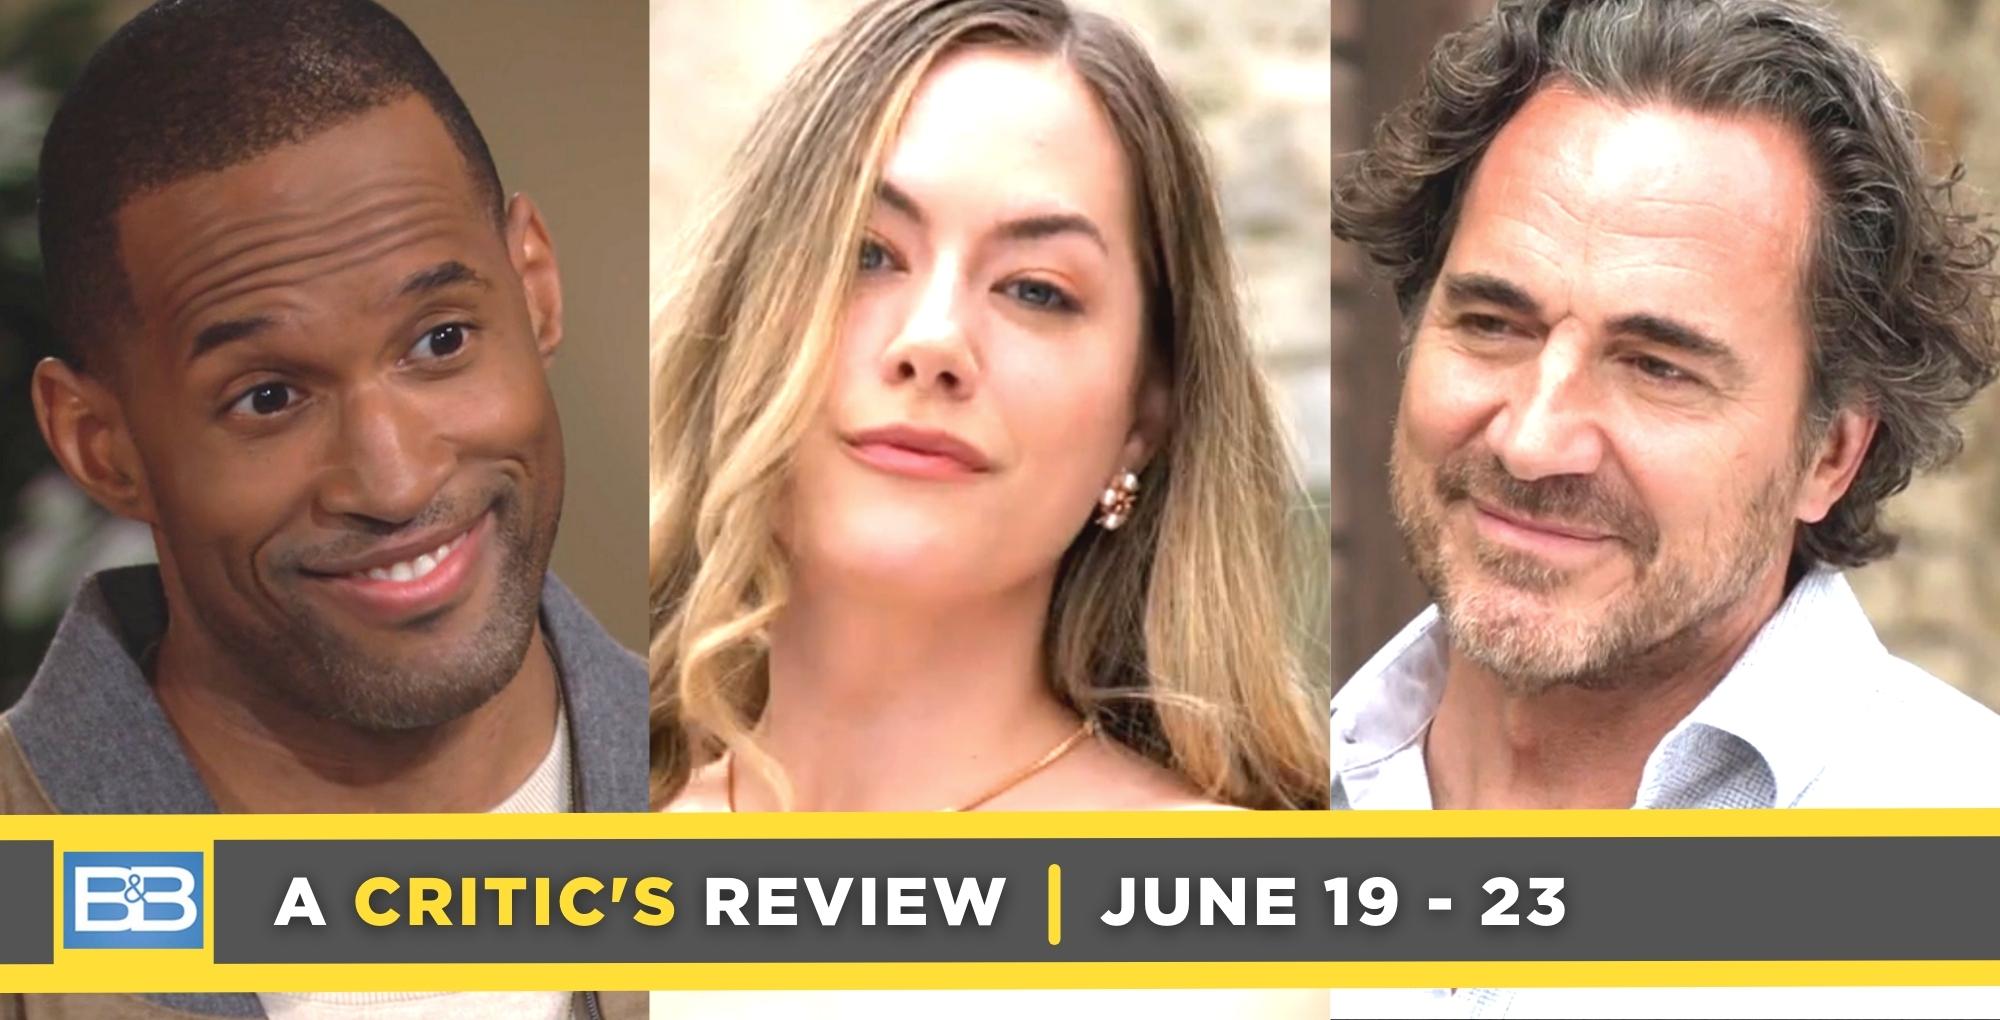 the bold and the beautiful critic's review for june 19 – june 23, 2023, three images carter, hope, and ridge.